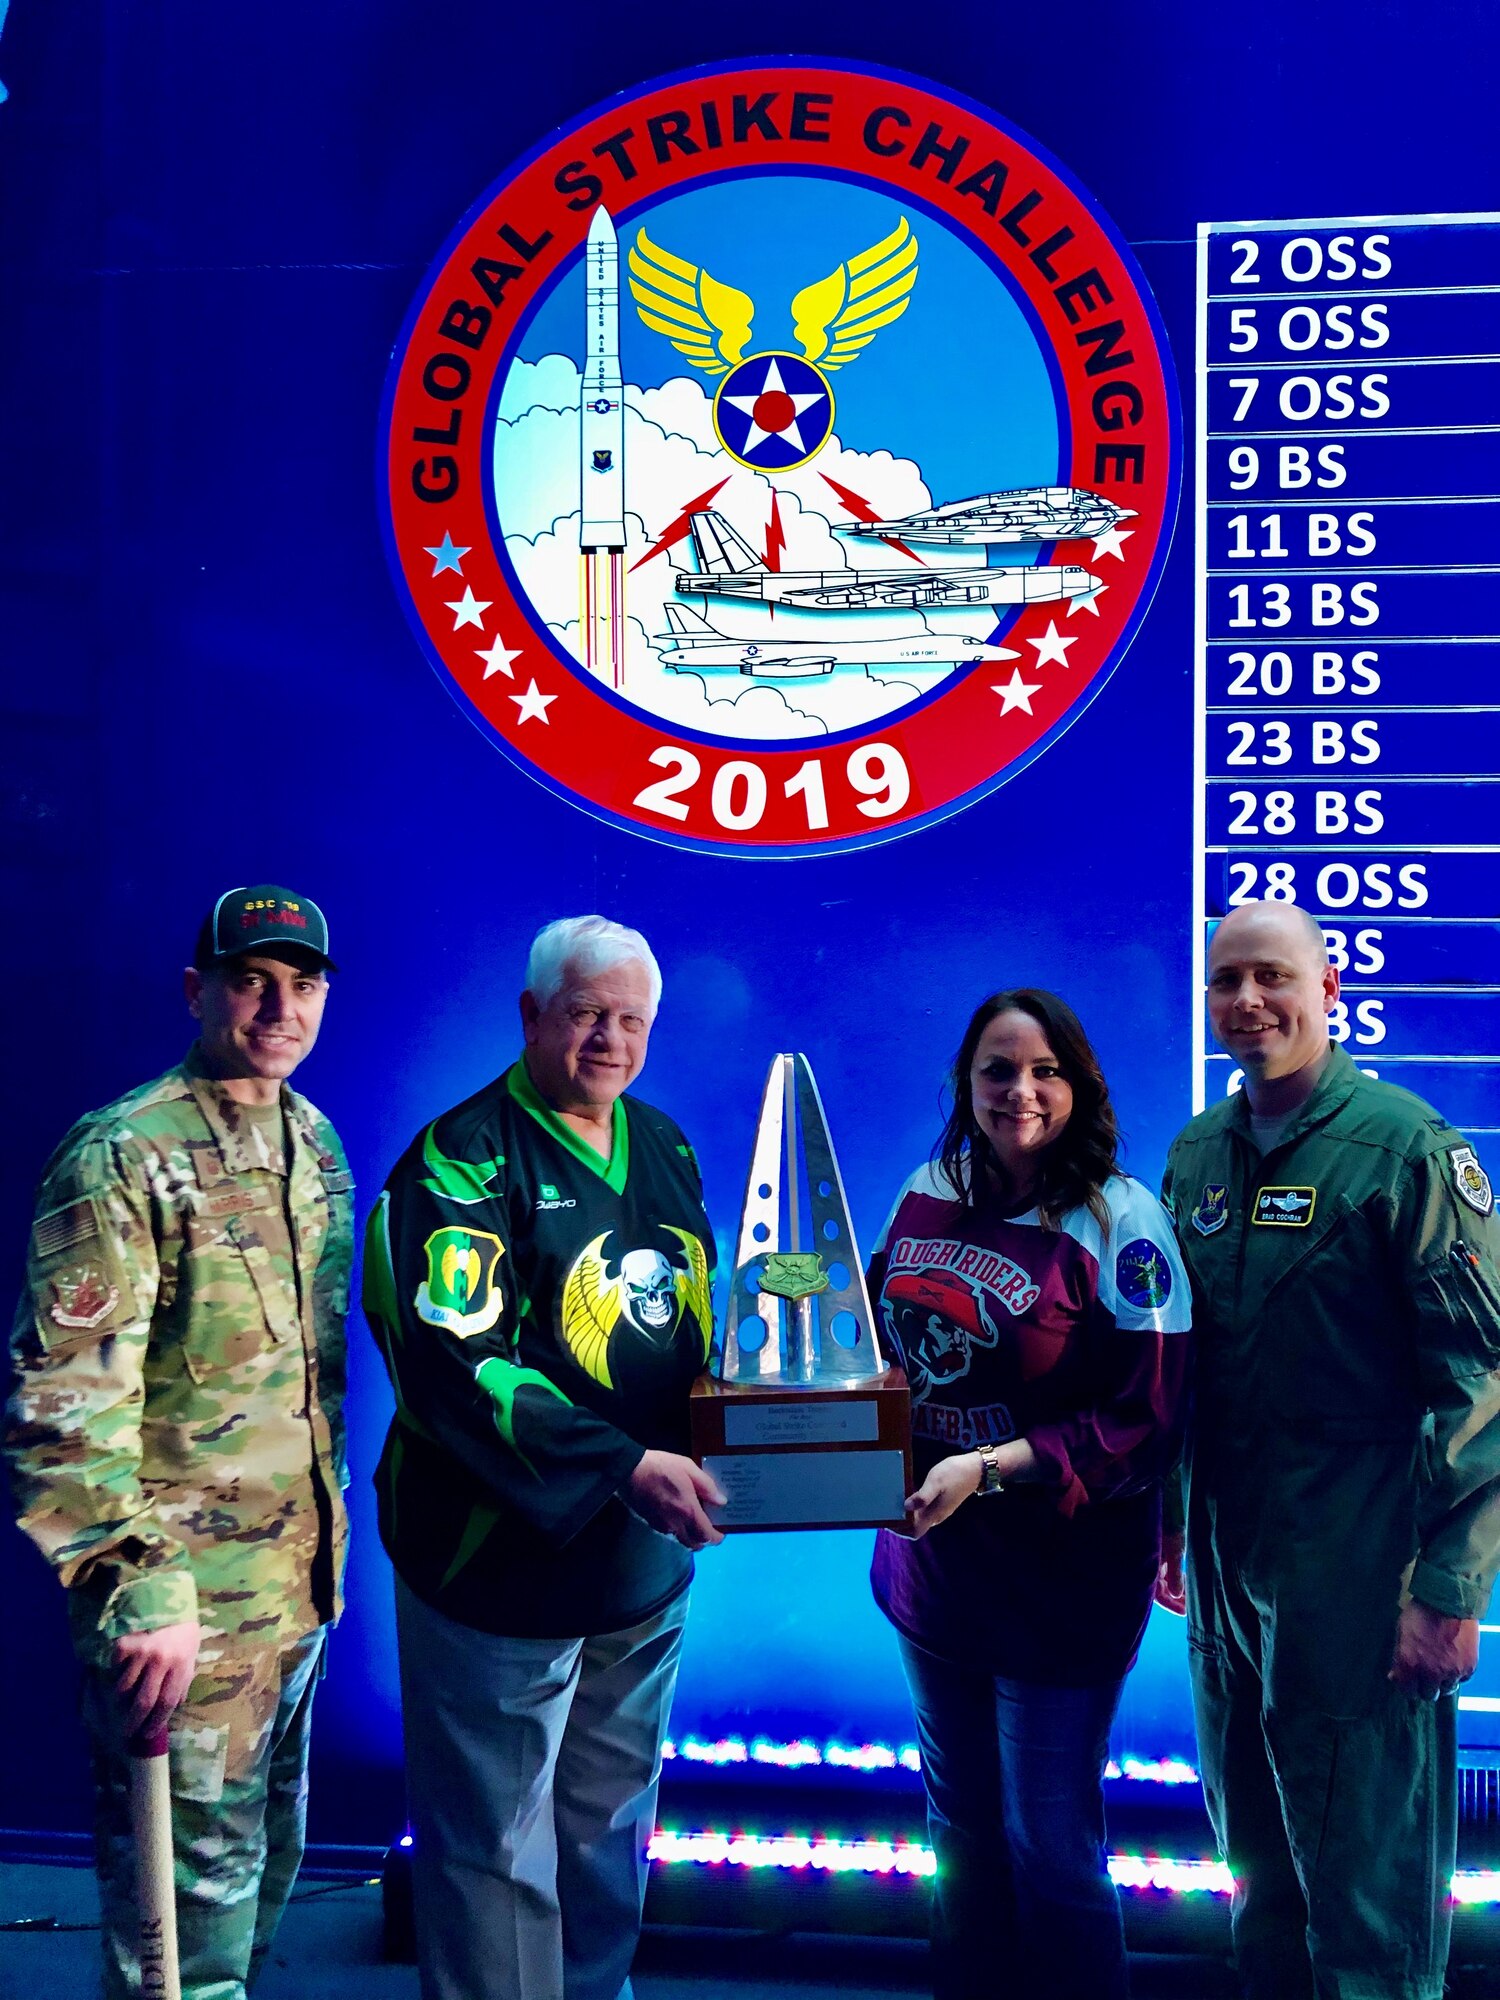 The community of Minot, North Dakota, took home the Barksdale Trophy for the outstanding community support to an AFGSC base during the 2019 Global Strike Challenge scoreposting Nov. 20 at Barksdale Air Force Base, La.